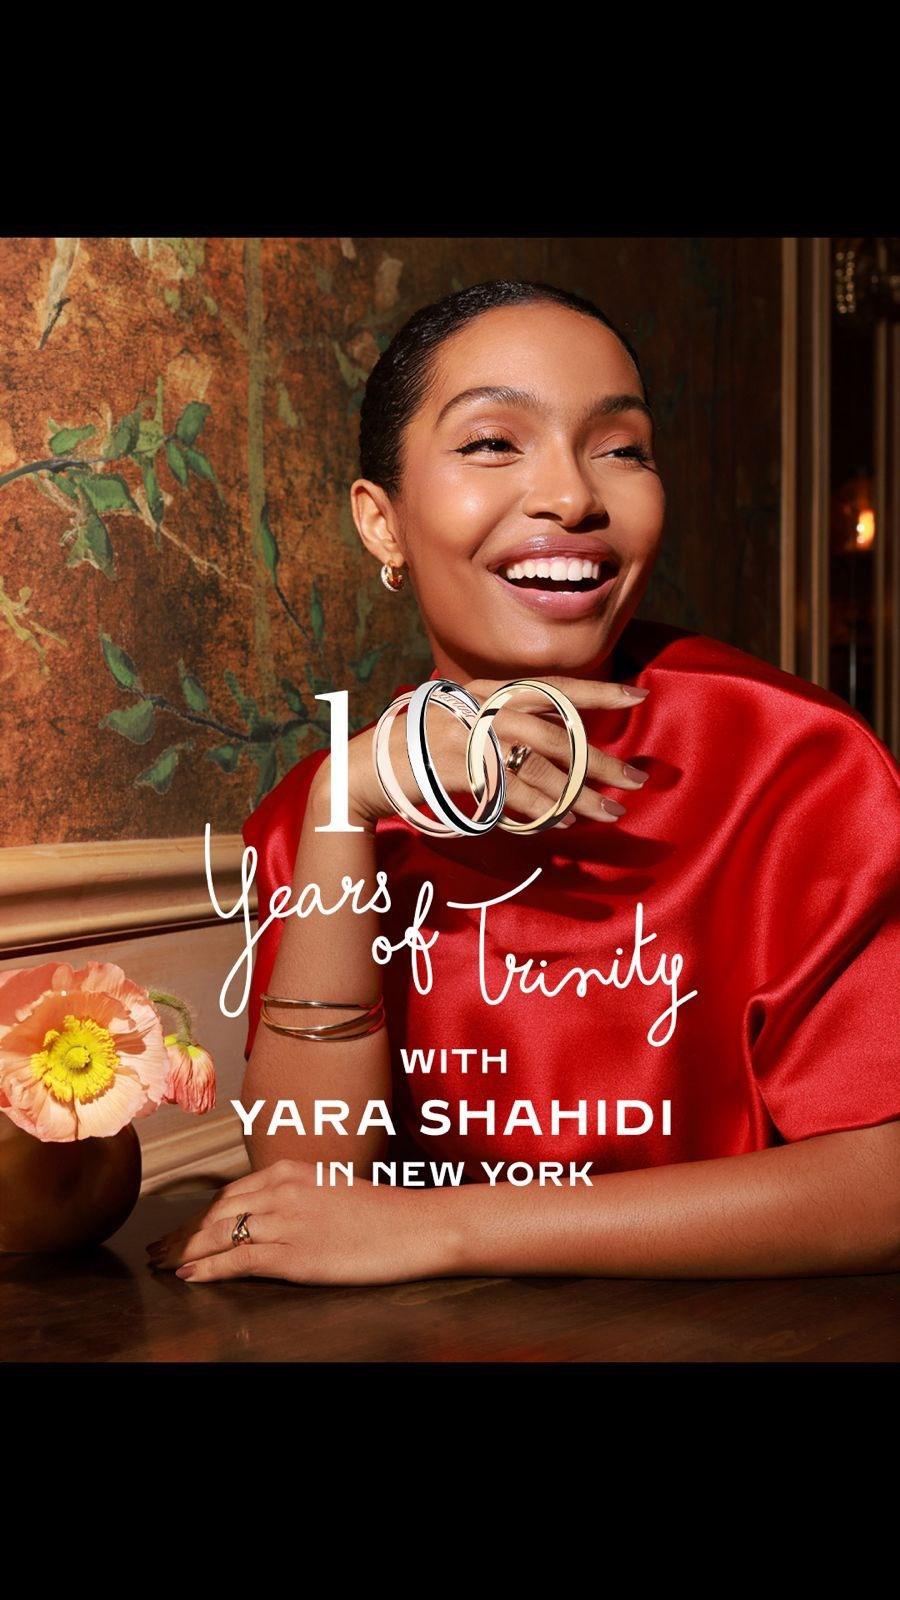 Kicking off in the Big Apple: the Maison welcomes you to New York for the first of Trinity’s centenary celebrations - through the eyes of actress and producer @YaraShahidi and creative director and celebrity stylist @JasonBolden.
#Trinity100Celebration #CartierTrinity